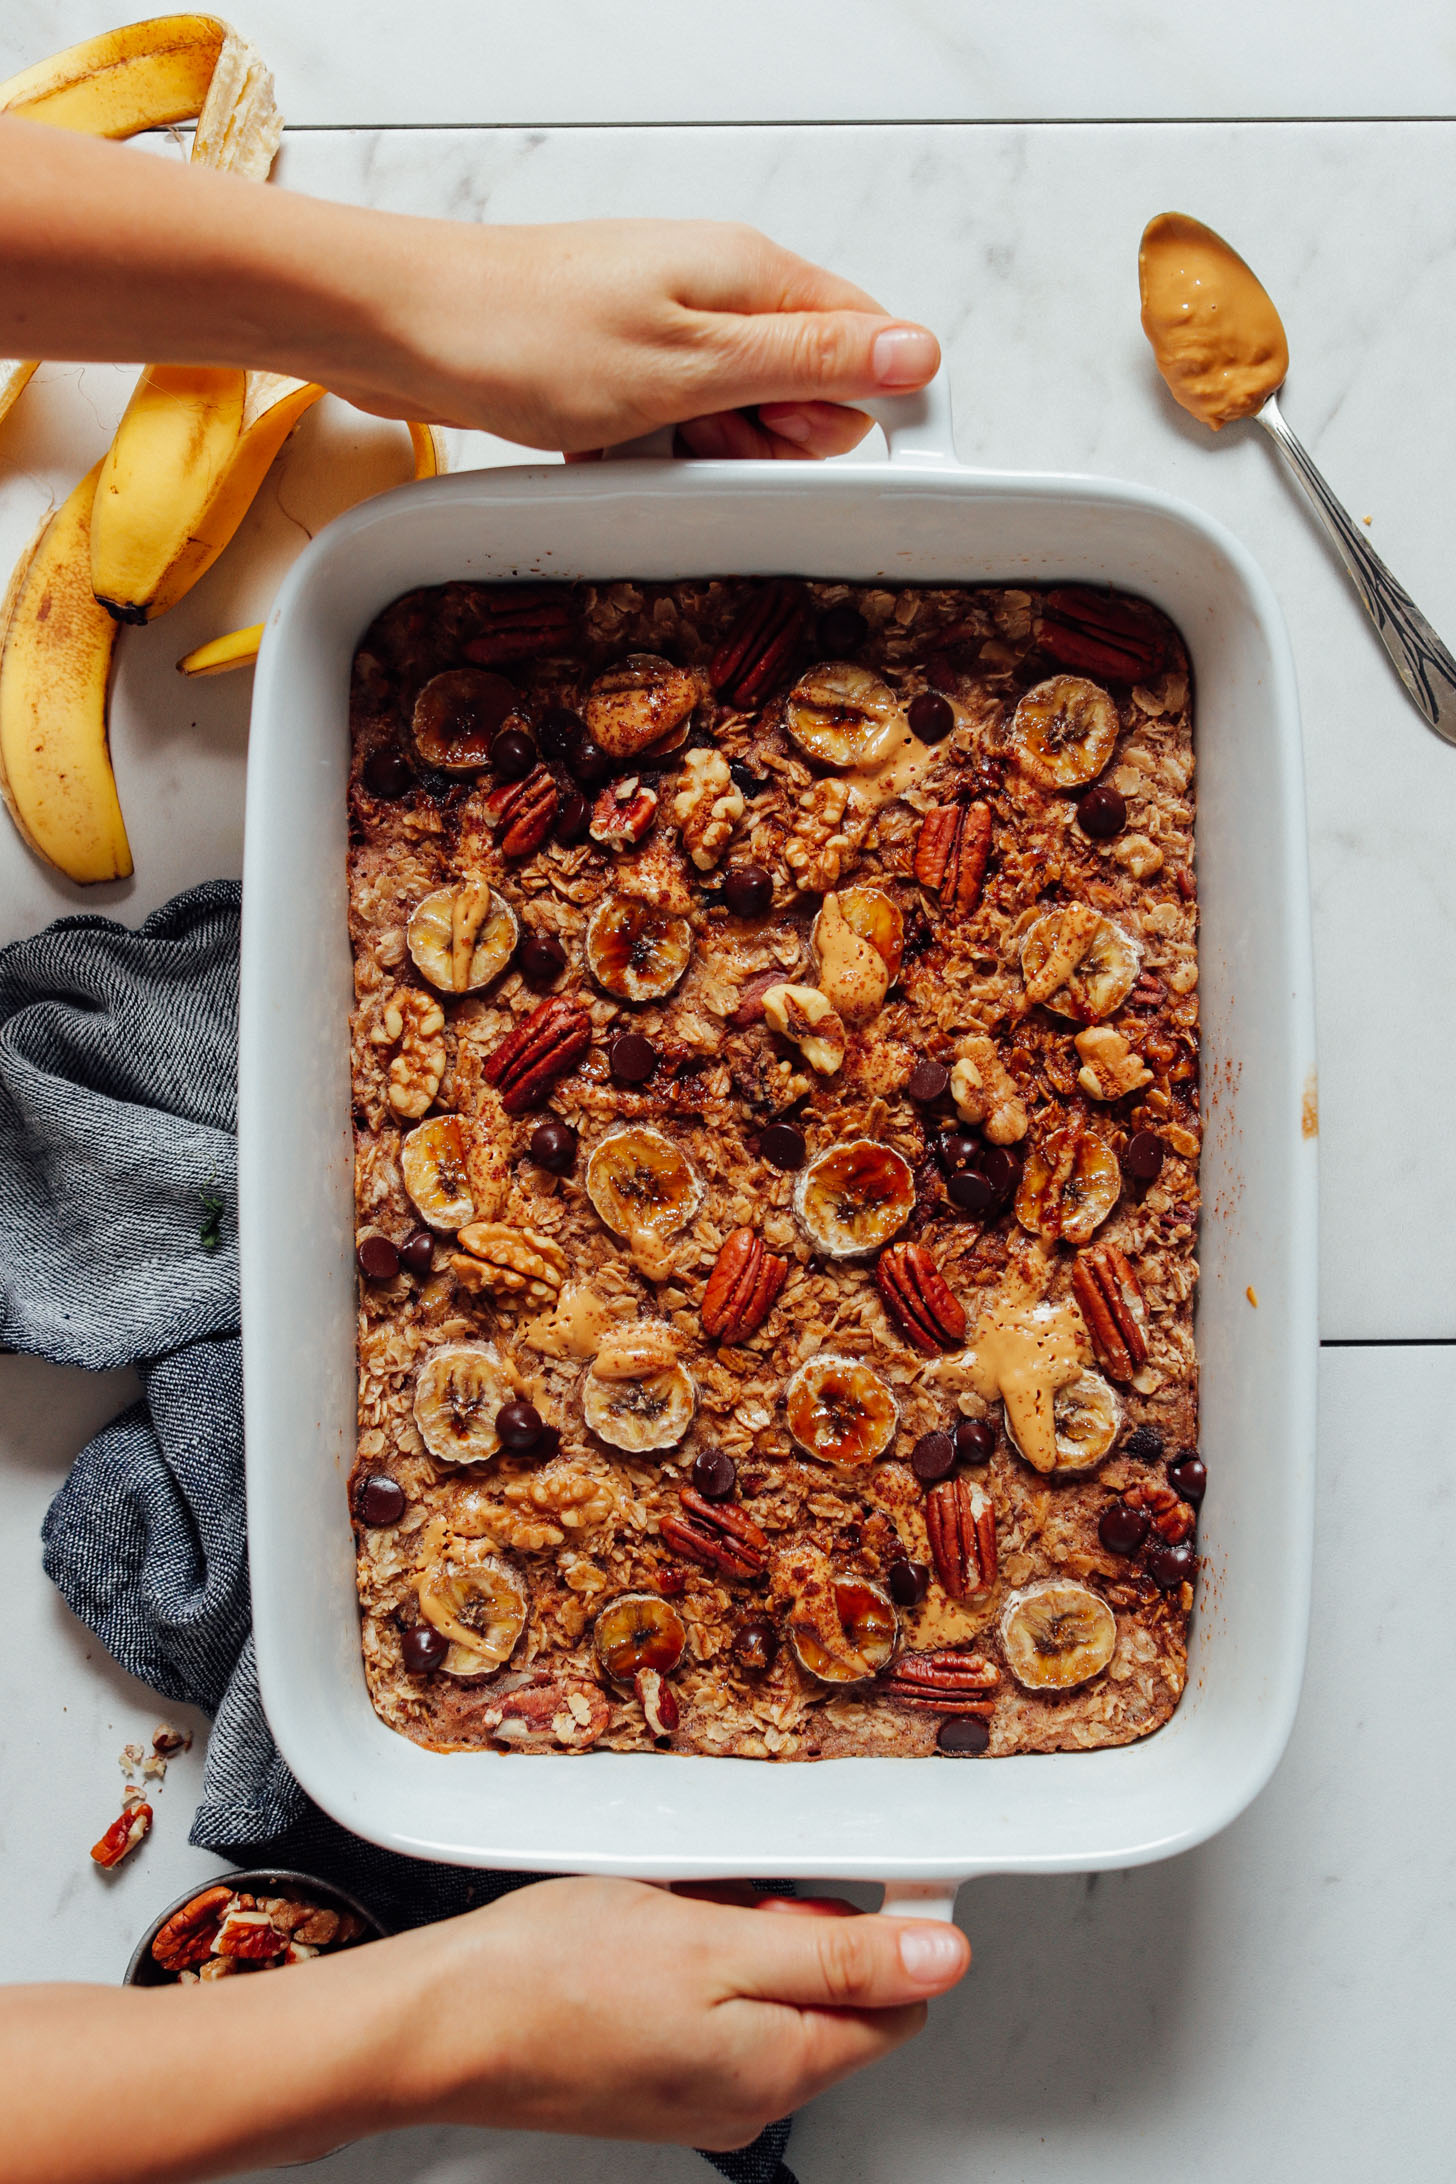 Overhead image of banana baked oatmeal in baking dish with hands holding the pan, and banana and nut butter on the side